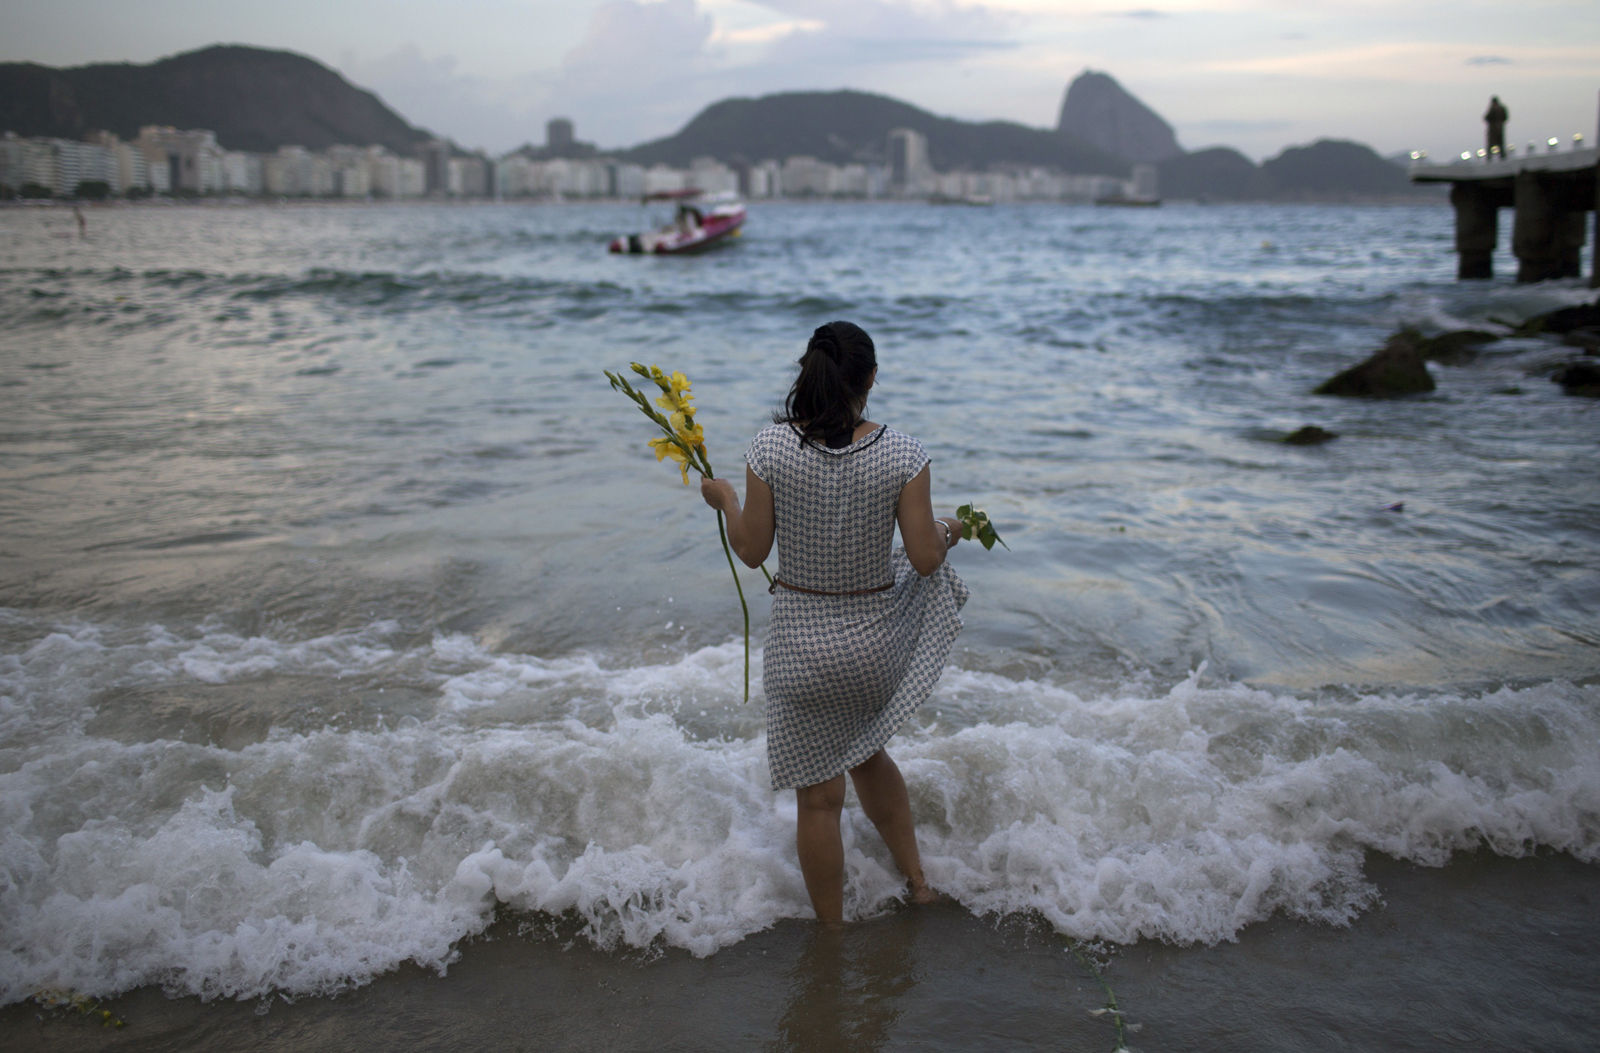 A woman offers flowers to Yemanja, goddess of the sea, for good luck in the coming year during New Year's Eve festivities on Copacabana beach in Rio de Janeiro, Brazil, Saturday, Dec. 31, 2016. The belief in the goddess comes from the African Yoruba religion brought to America by West African slaves. (AP Photo/Leo Correa)